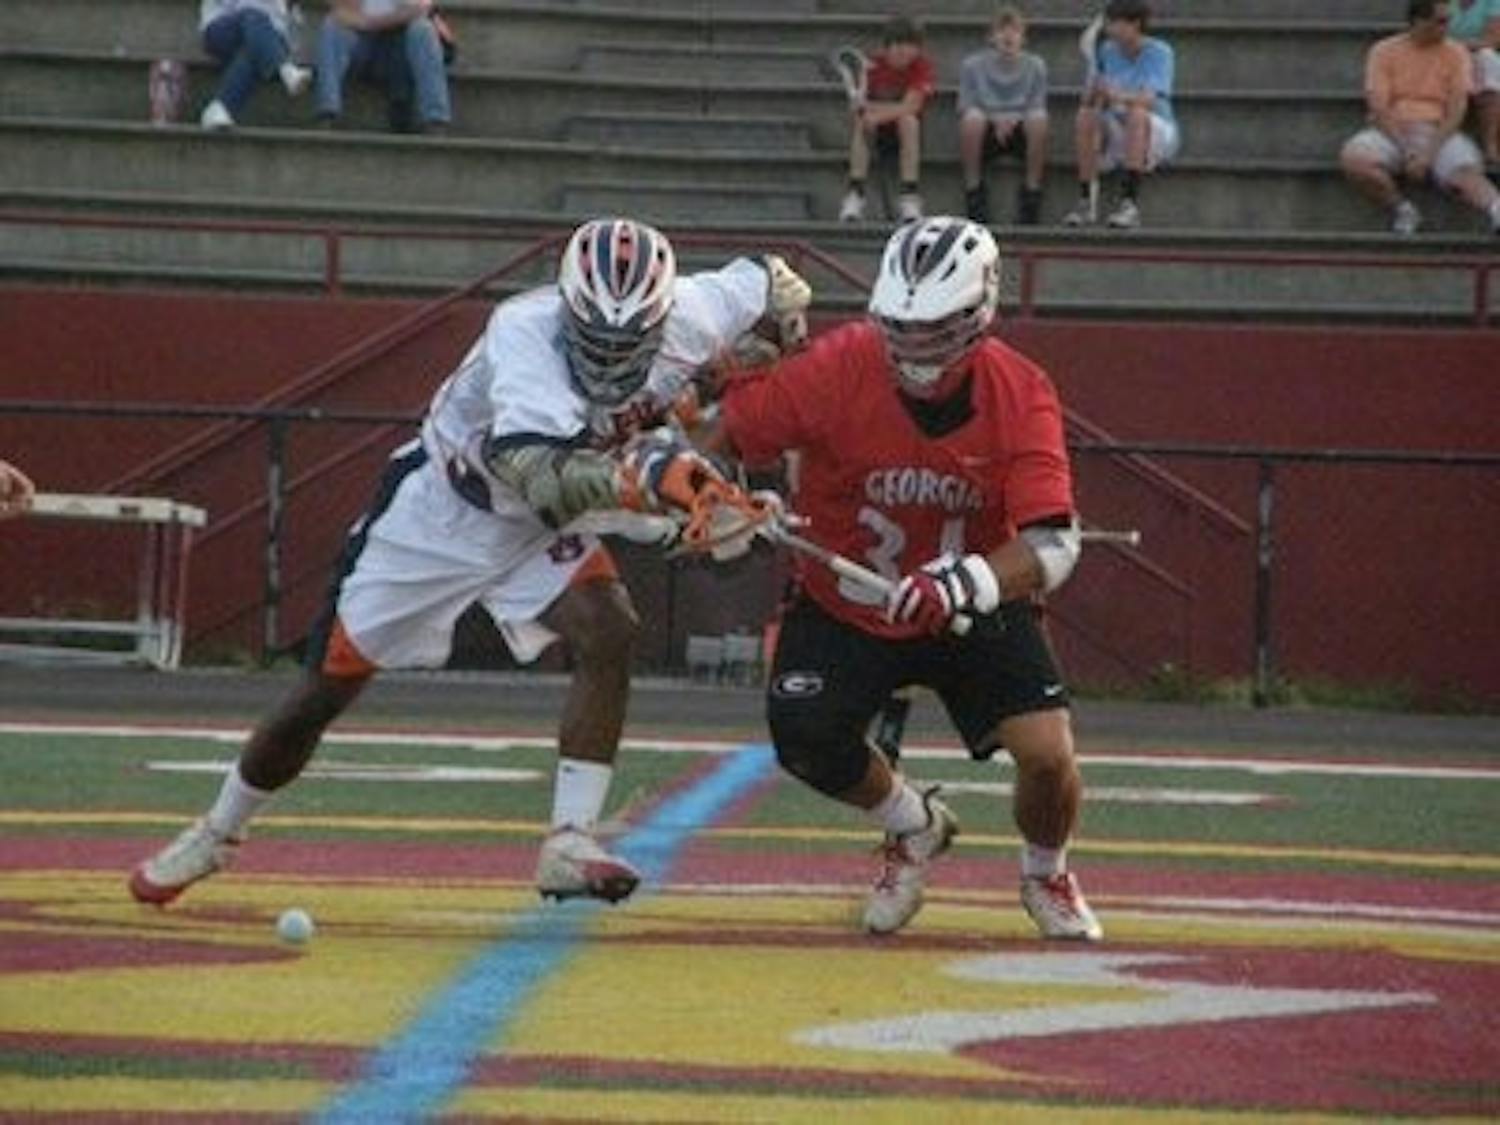 Mshon Pulliam, senior midfielder, battles with a Georgia opponent for position during a match last season. (CONTRIBUTED)